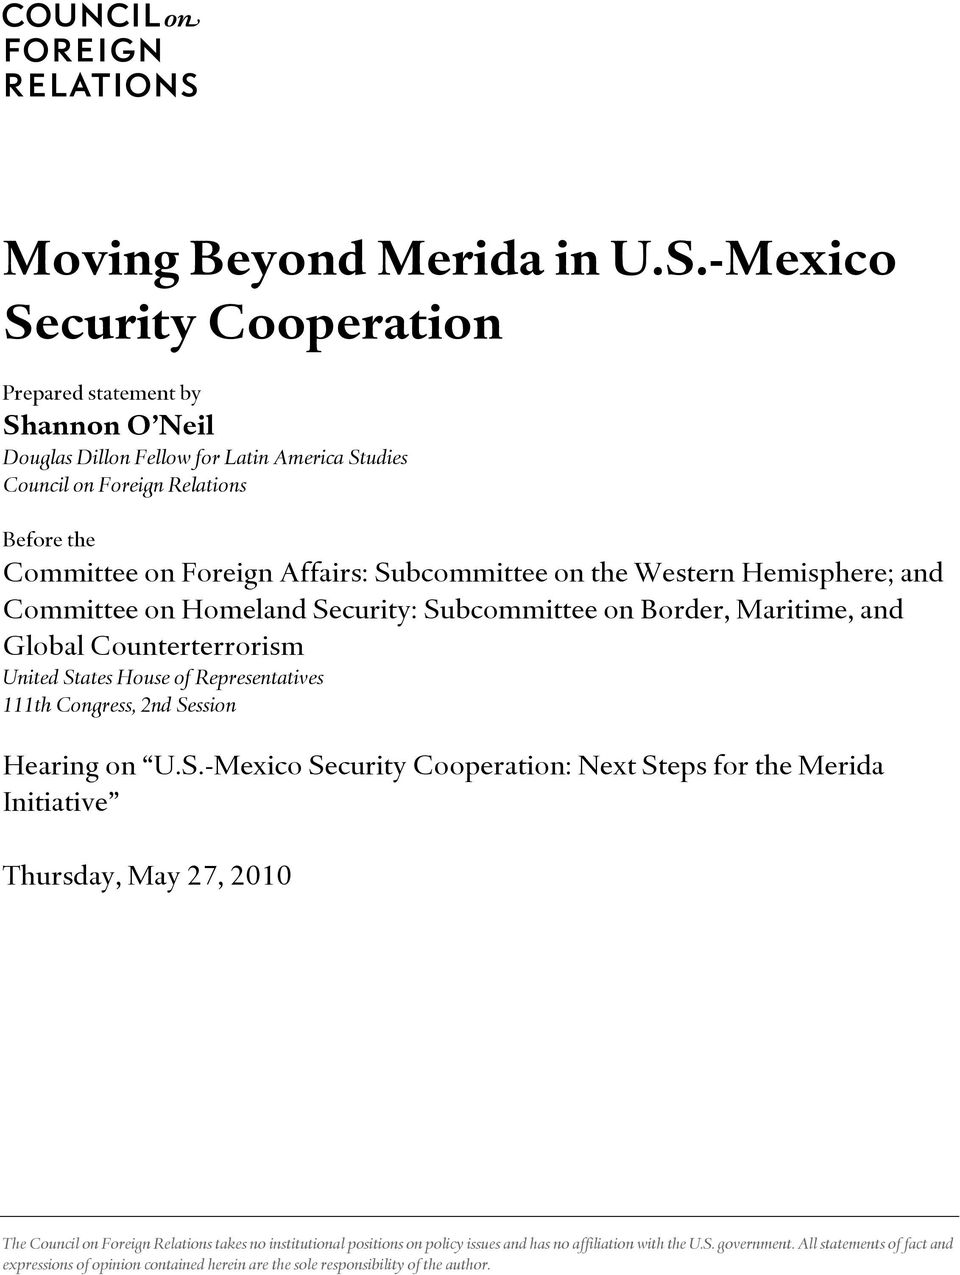 Subcommittee on the Western Hemisphere; and Committee on Homeland Security: Subcommittee on Border, Maritime, and Global Counterterrorism United States House of Representatives 111th